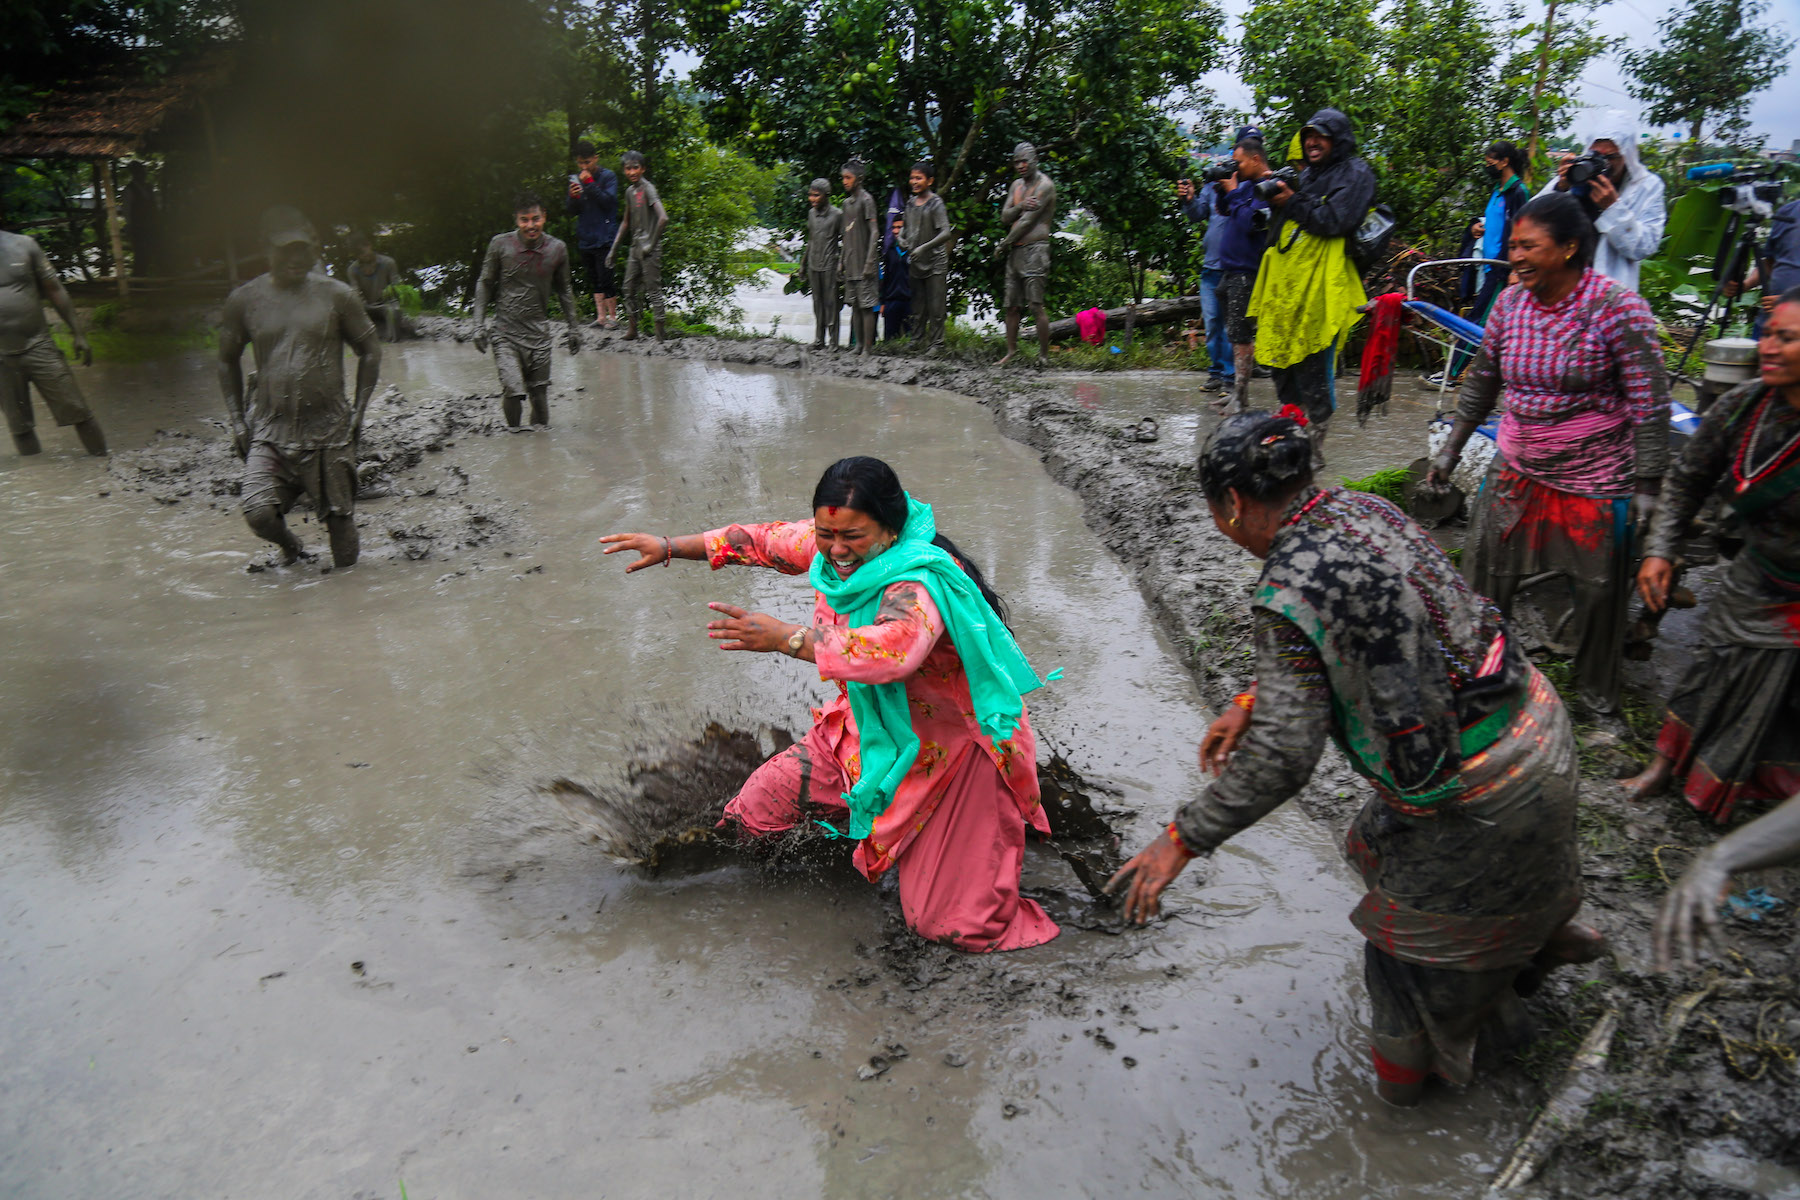 A woman enters a paddy field filled with mud.